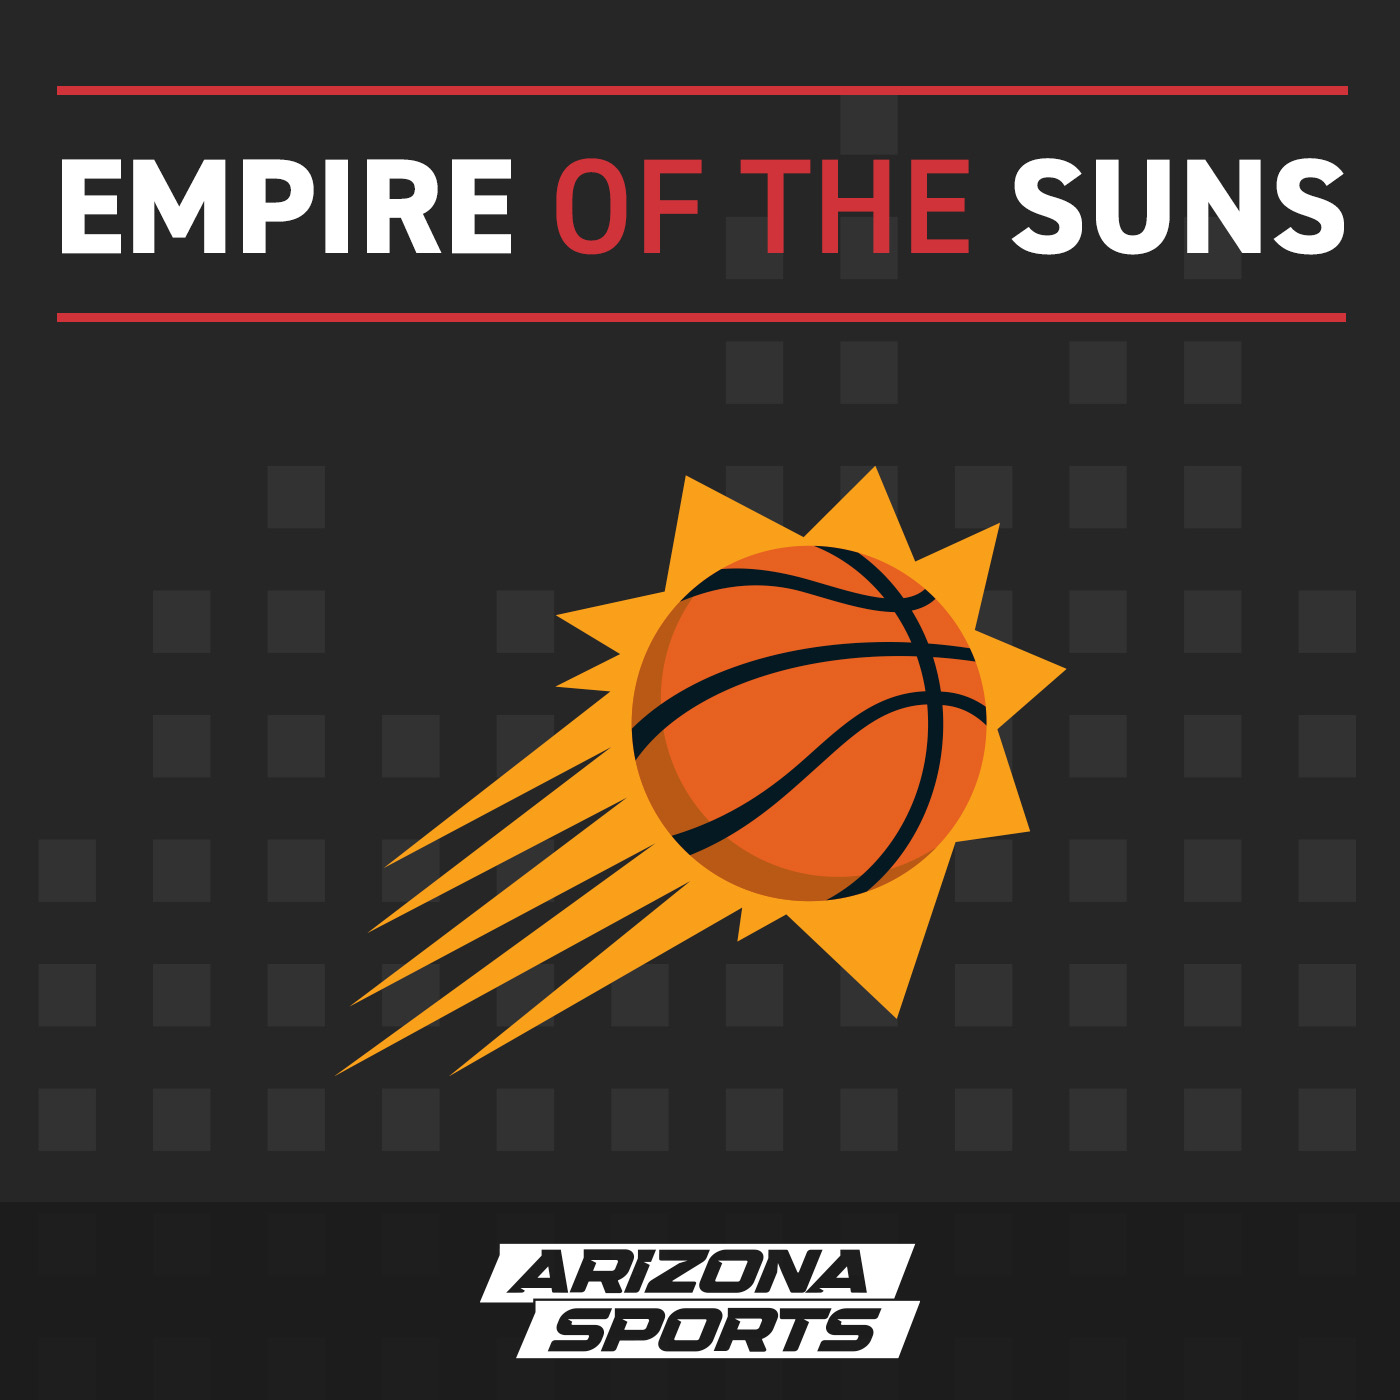 Suns Summer League reviews, Cam Payne-T.J. McConnell trade rumors and more - July 13